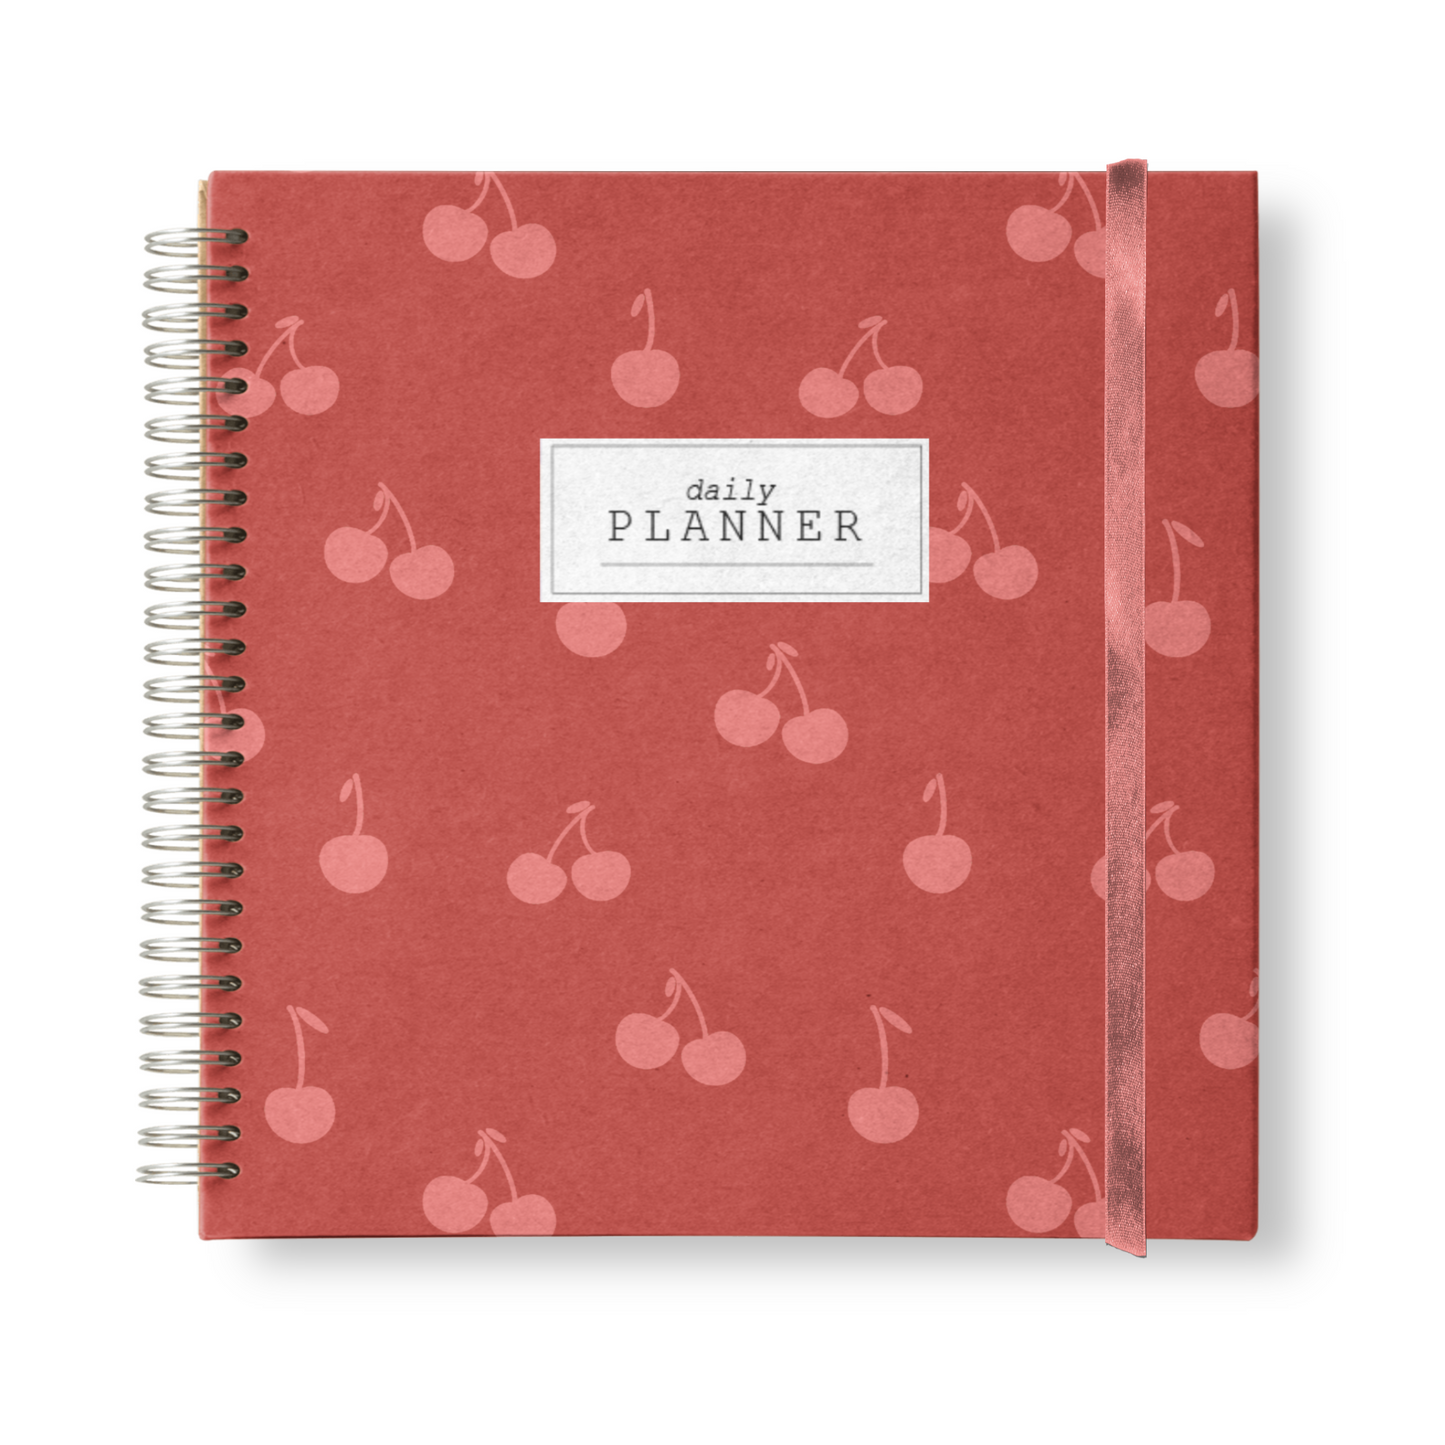 Daily Planner "Cherry"